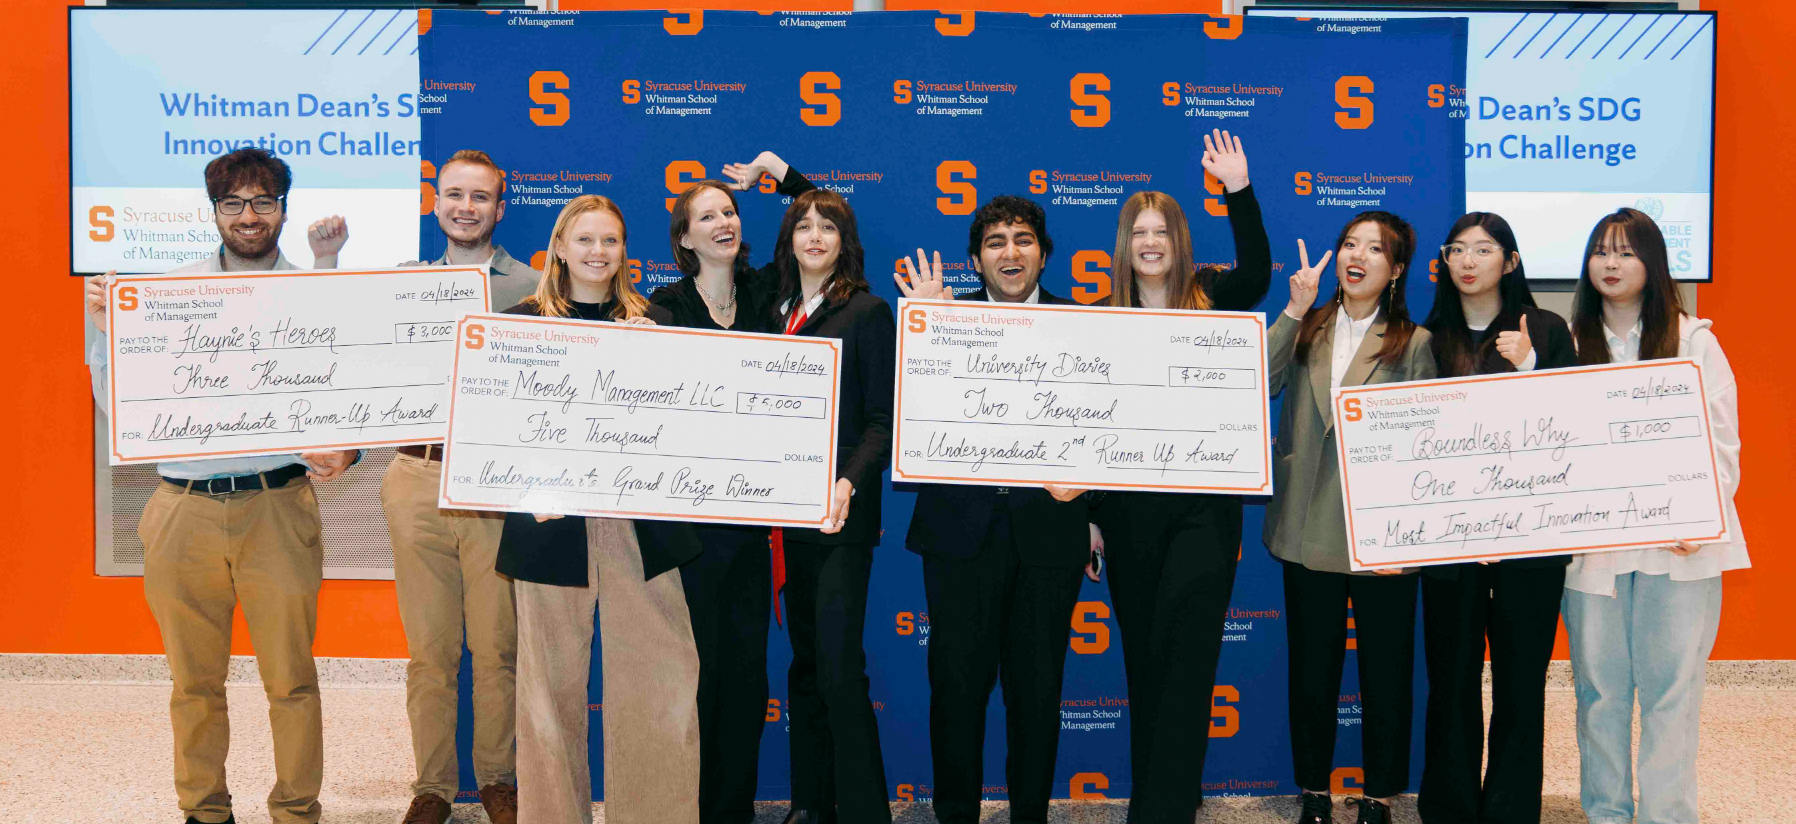 Four sets of groups of students holding oversized checks